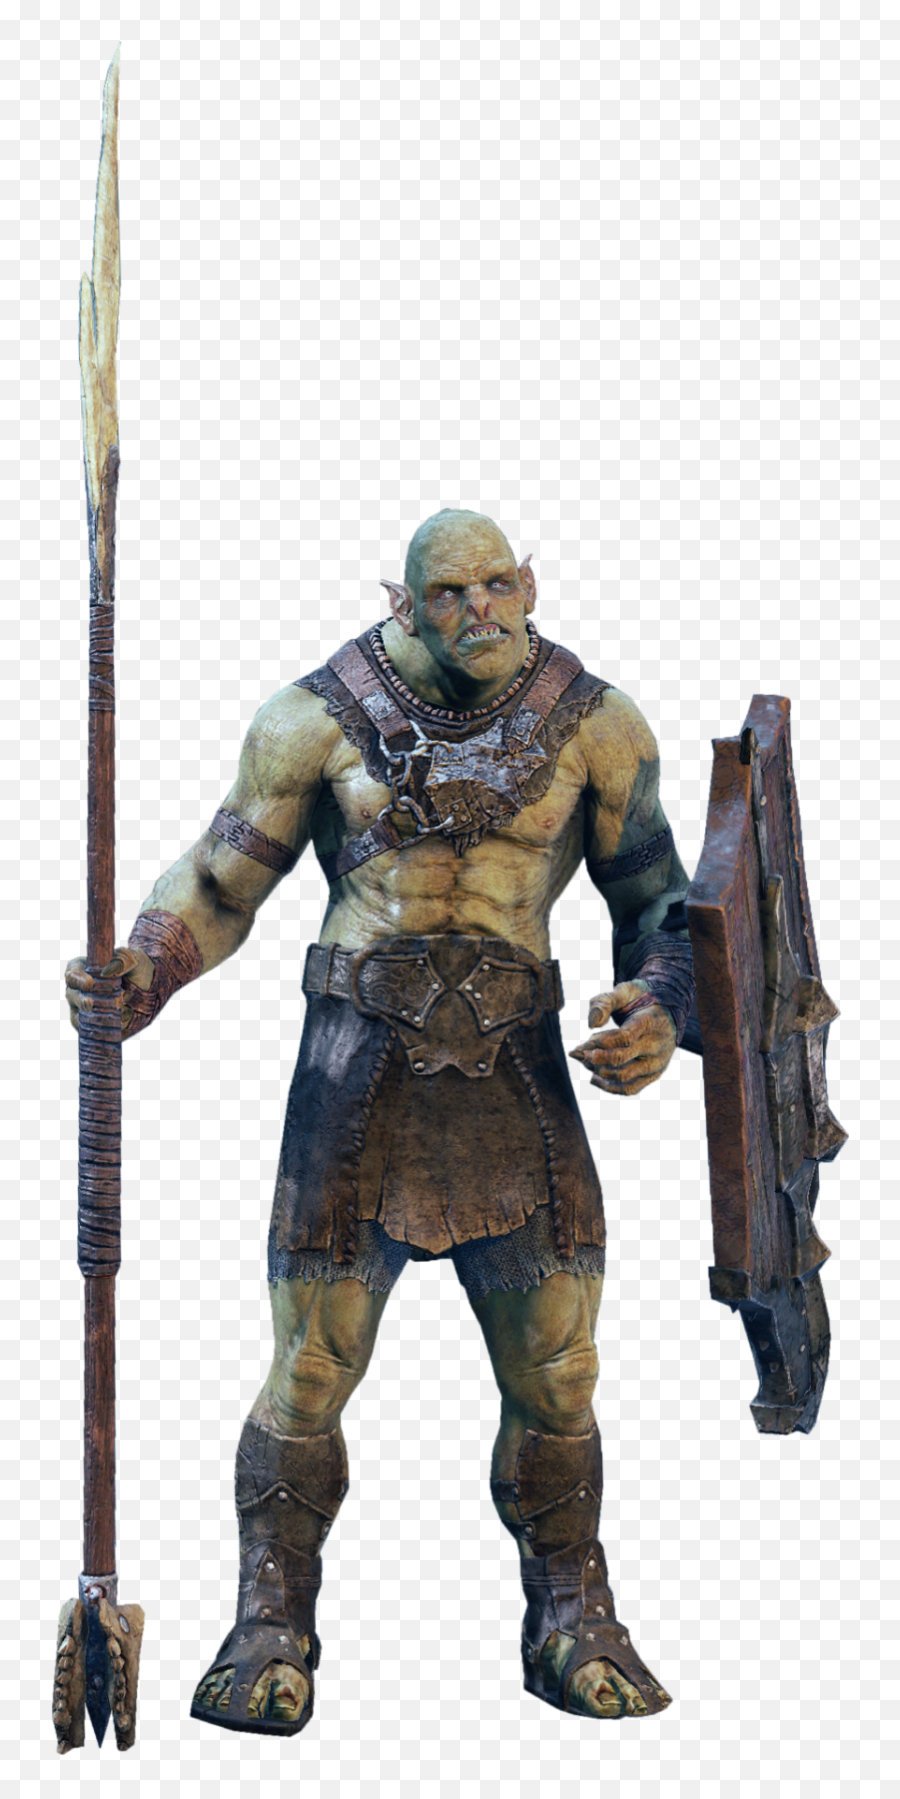 Orc Png Image - Middle Earth Shadow Of Mordor Orc,Orc Png